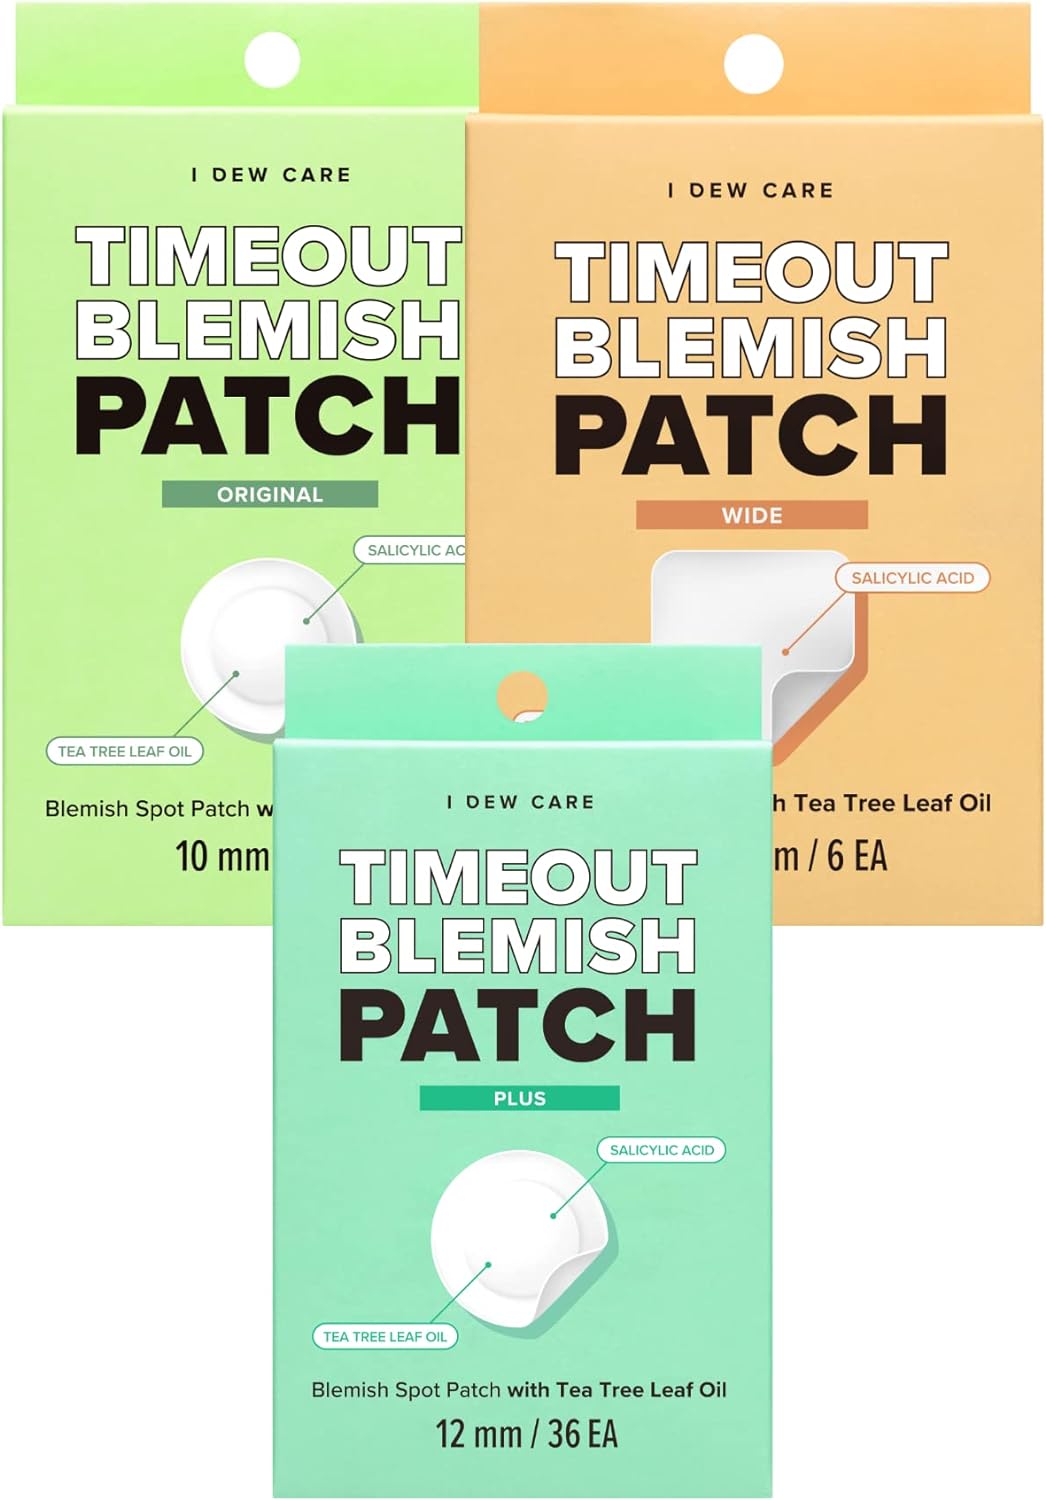 I DEW CARE Hydrocolloid Acne Pimple Patch Review